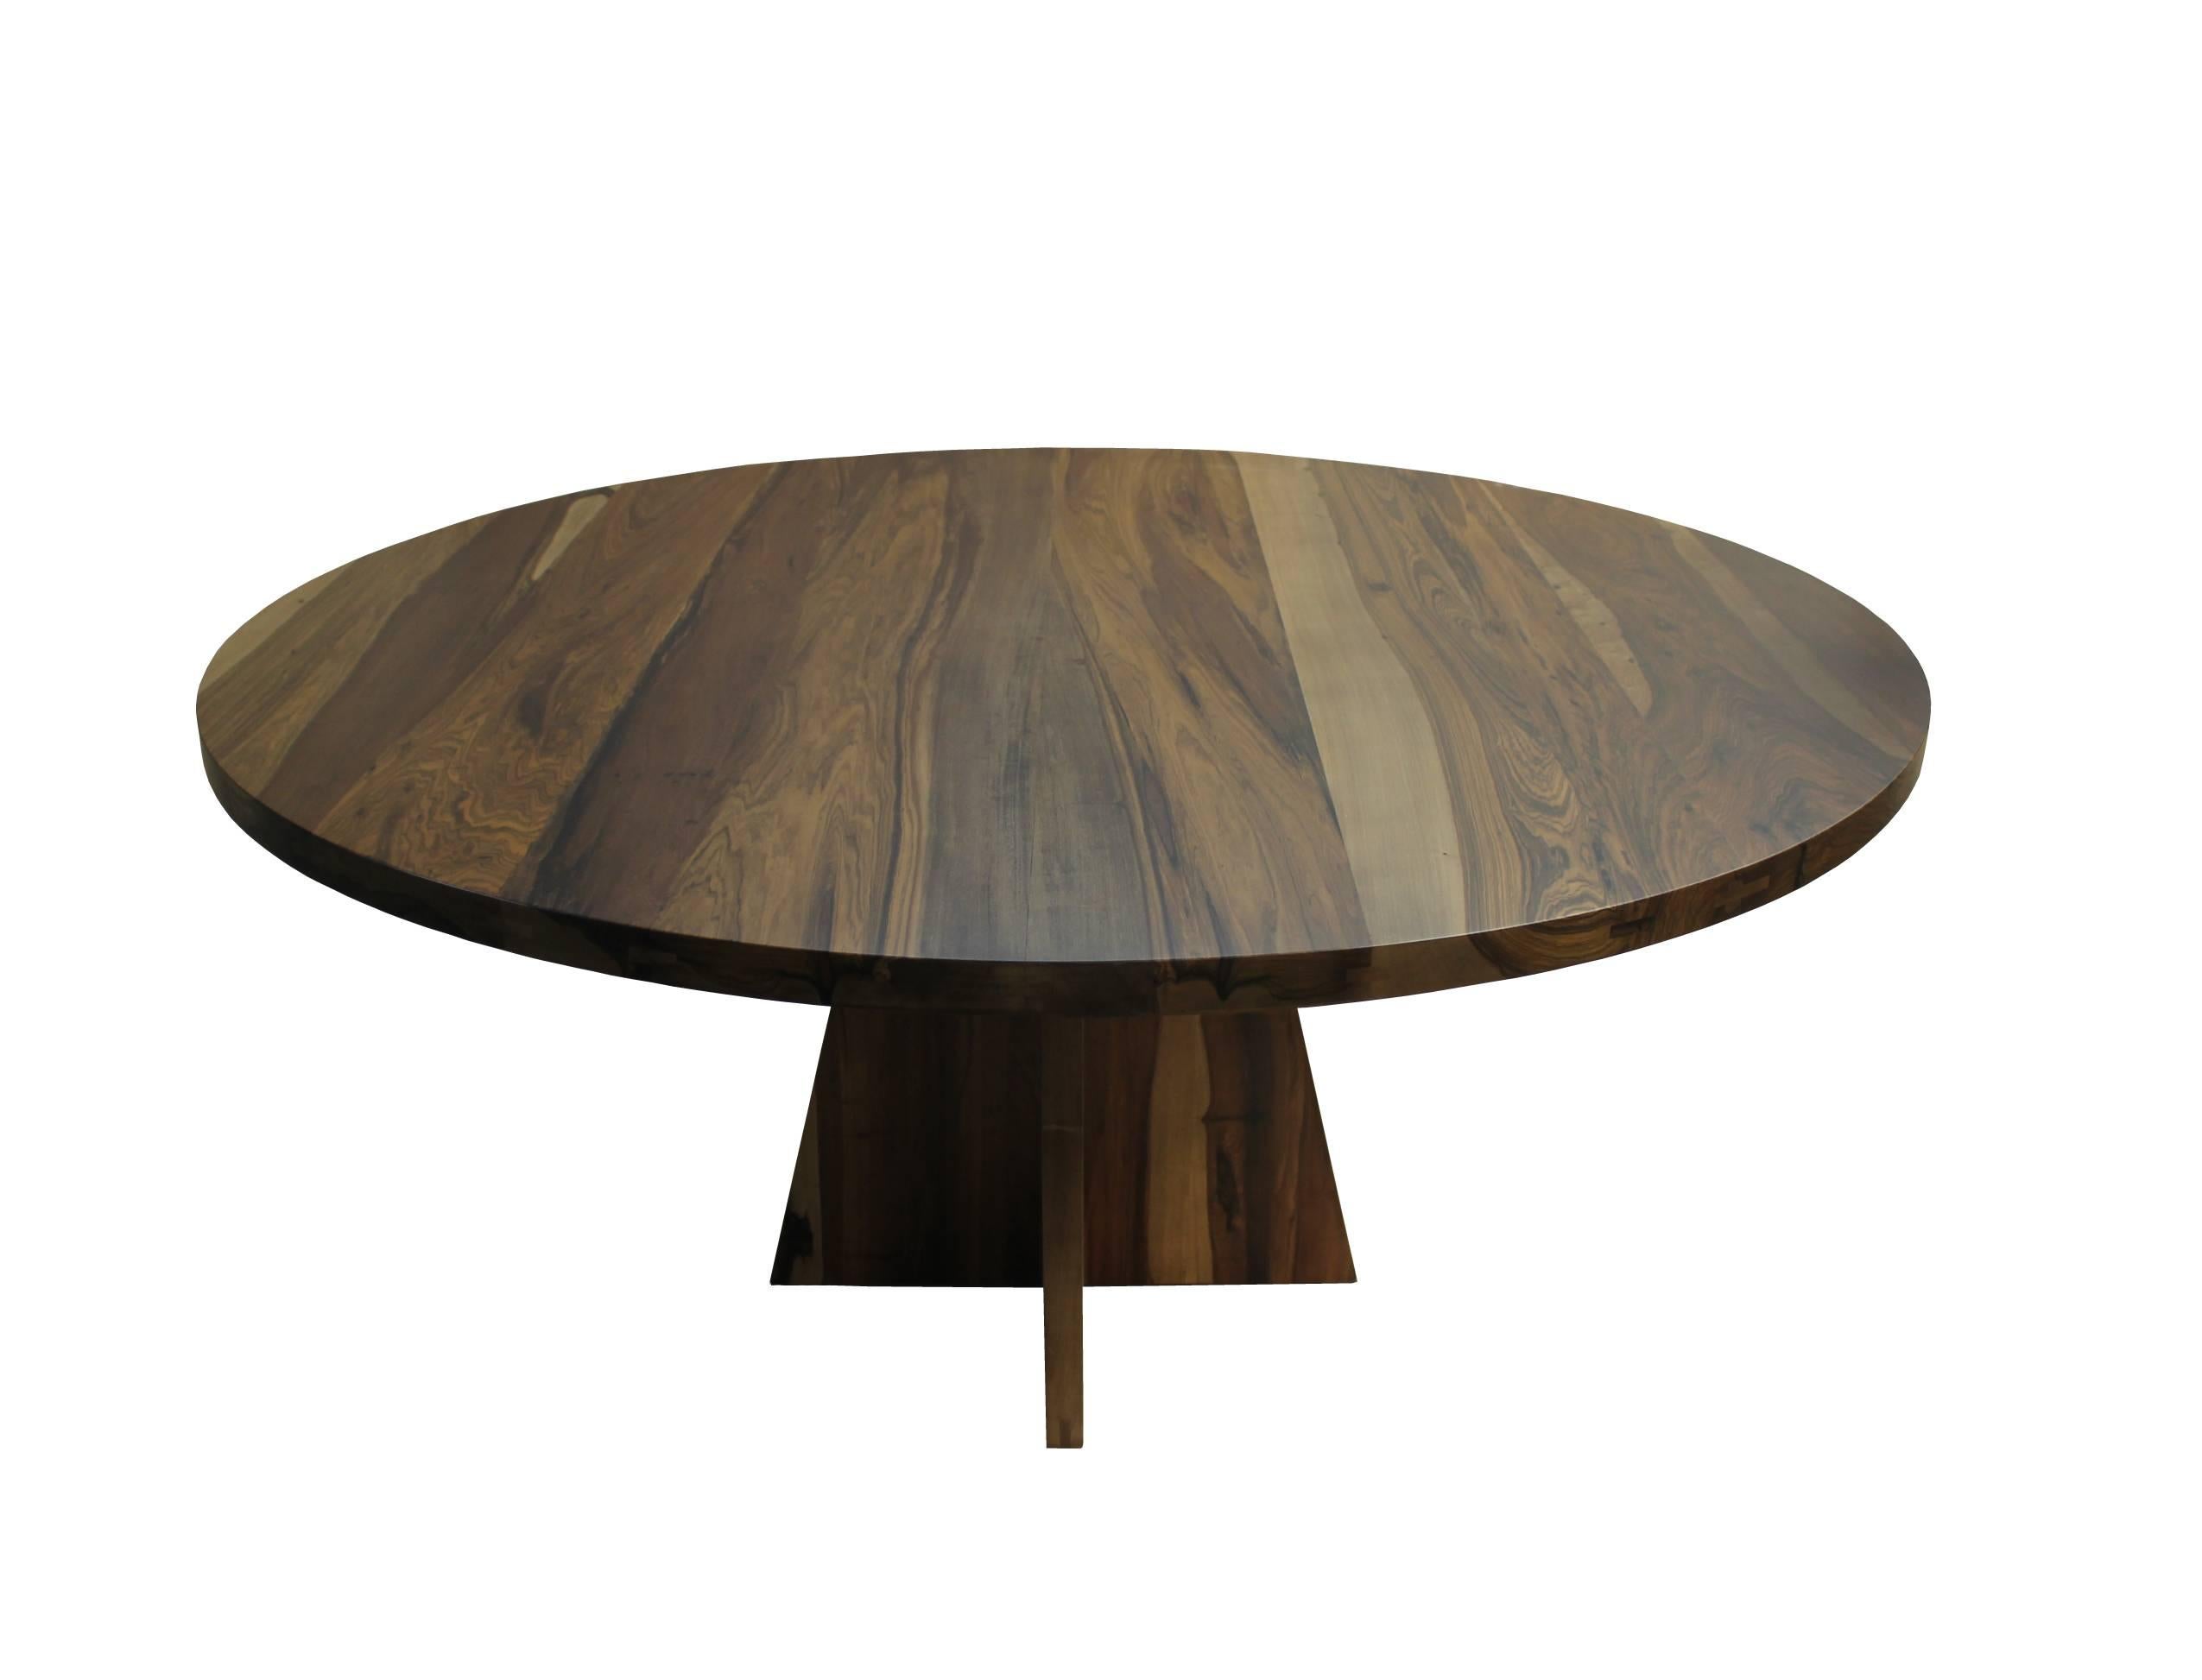 The Luca Table is one of Costantini’s signature and most specified pieces. It is shown in Argentine Rosewood, a species known for its hardness as well as its heavy graining. The design itself is understated and architectural in nature and lets the